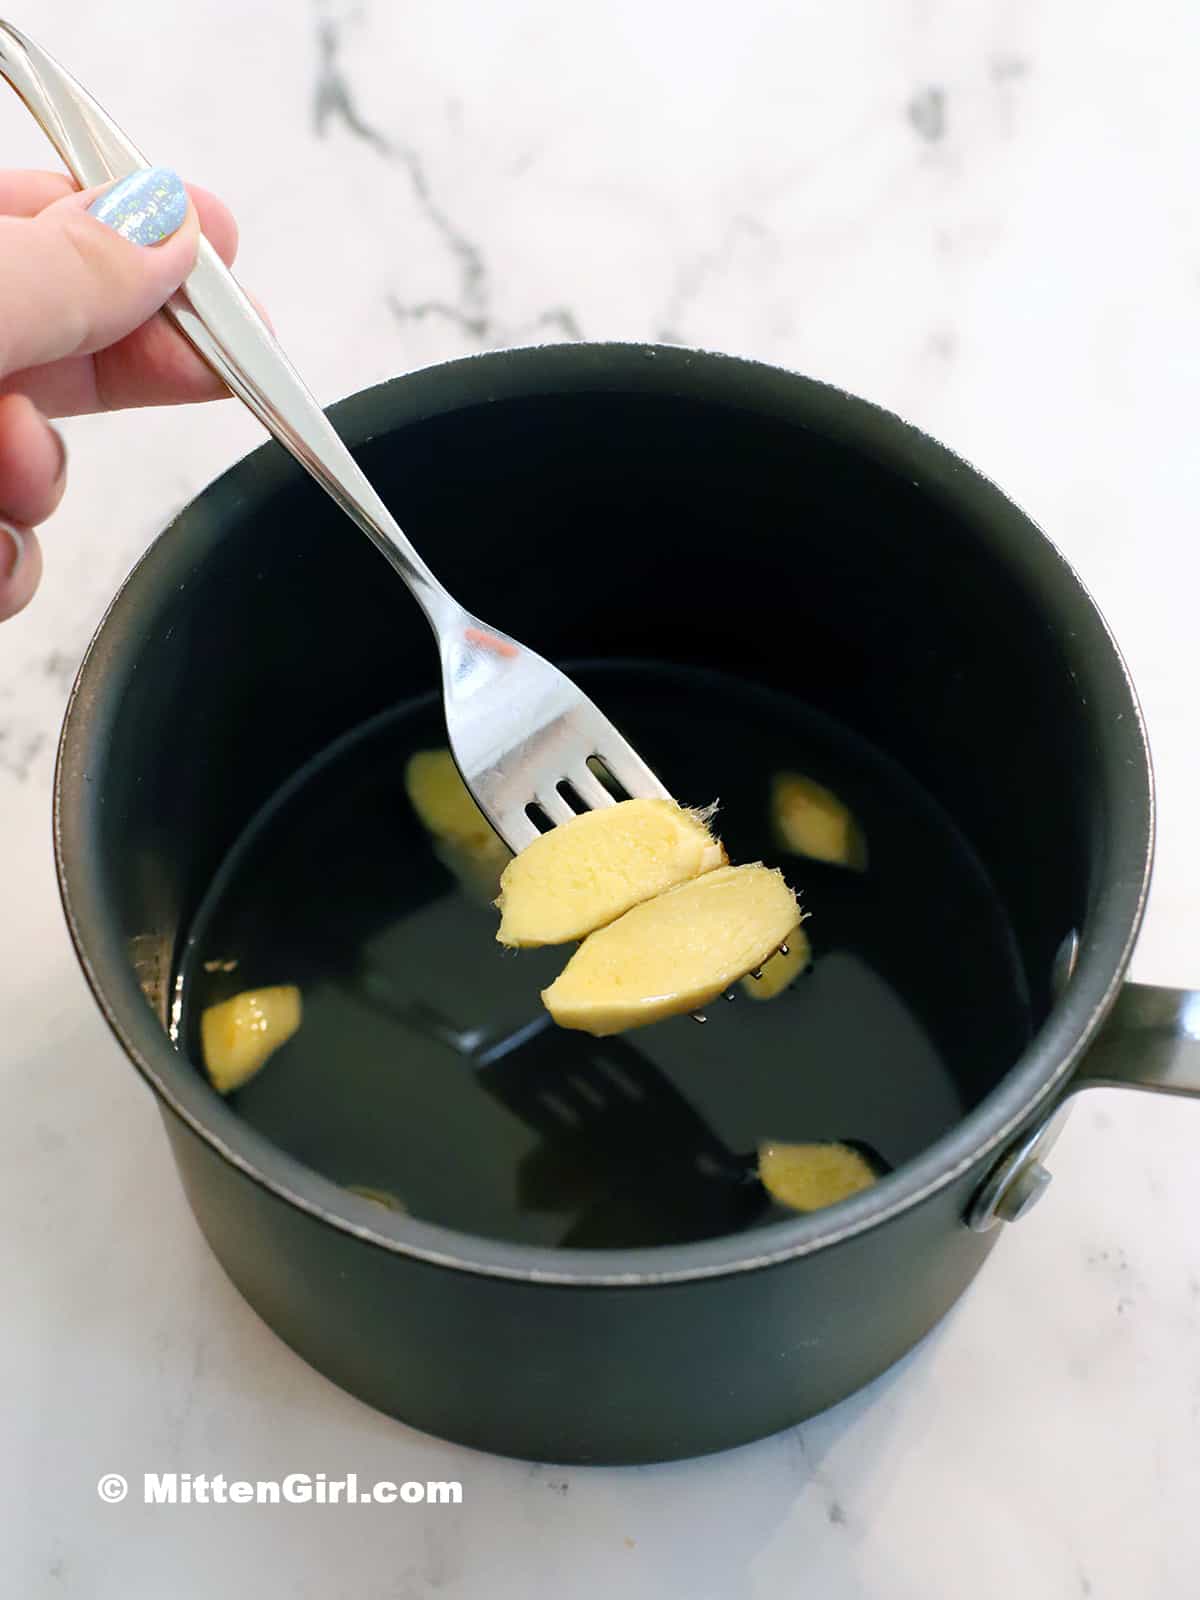 A fork lifting pieces of ginger root out of a pot of syrup.